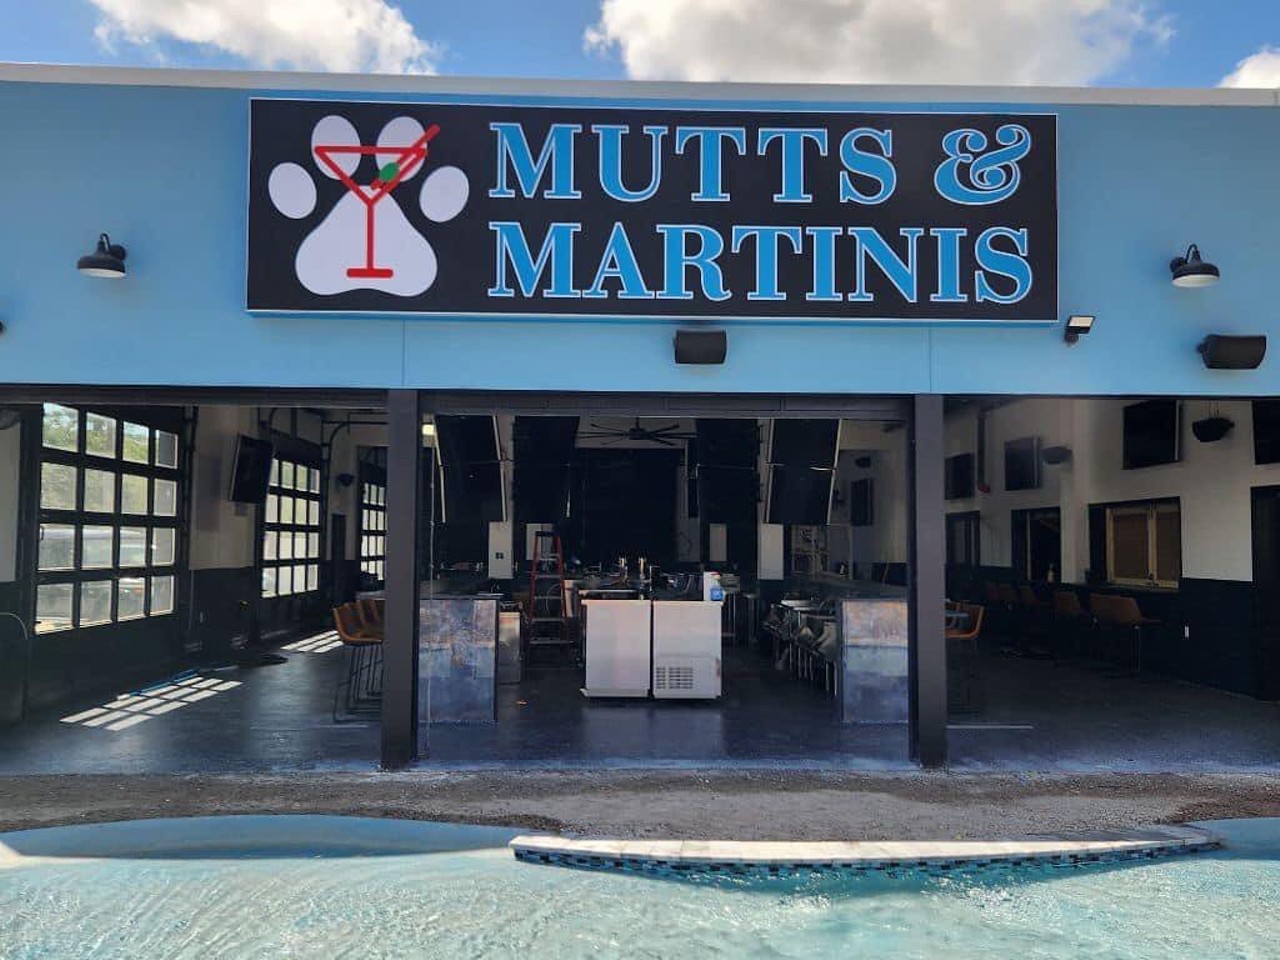 Mutts & Martinis
2900 Central Ave., St. Petersburg, 727-284-6750
Mutts & Martinis, Tampa Bay’s only backyard bar and doggy waterpark, features a variety of “muttgaritas” and “dogtinis.” The concept was announced in 2020 and is the latest from Natalie Corner, who also owns both locations of Love My Dog Resorts. “Human hours” are 2 p.m.- 9 p.m. Wednesday, Thursday and Sunday, noon-midnight on Friday, and 10 a.m.-midnight Saturday. “Dog hours” are until 9 p.m. every night, afterwards no dogs will be allowed on the premises to make way for live music and other late-night entertainment. 
Photo via  Mutts & Martinis/Facebook